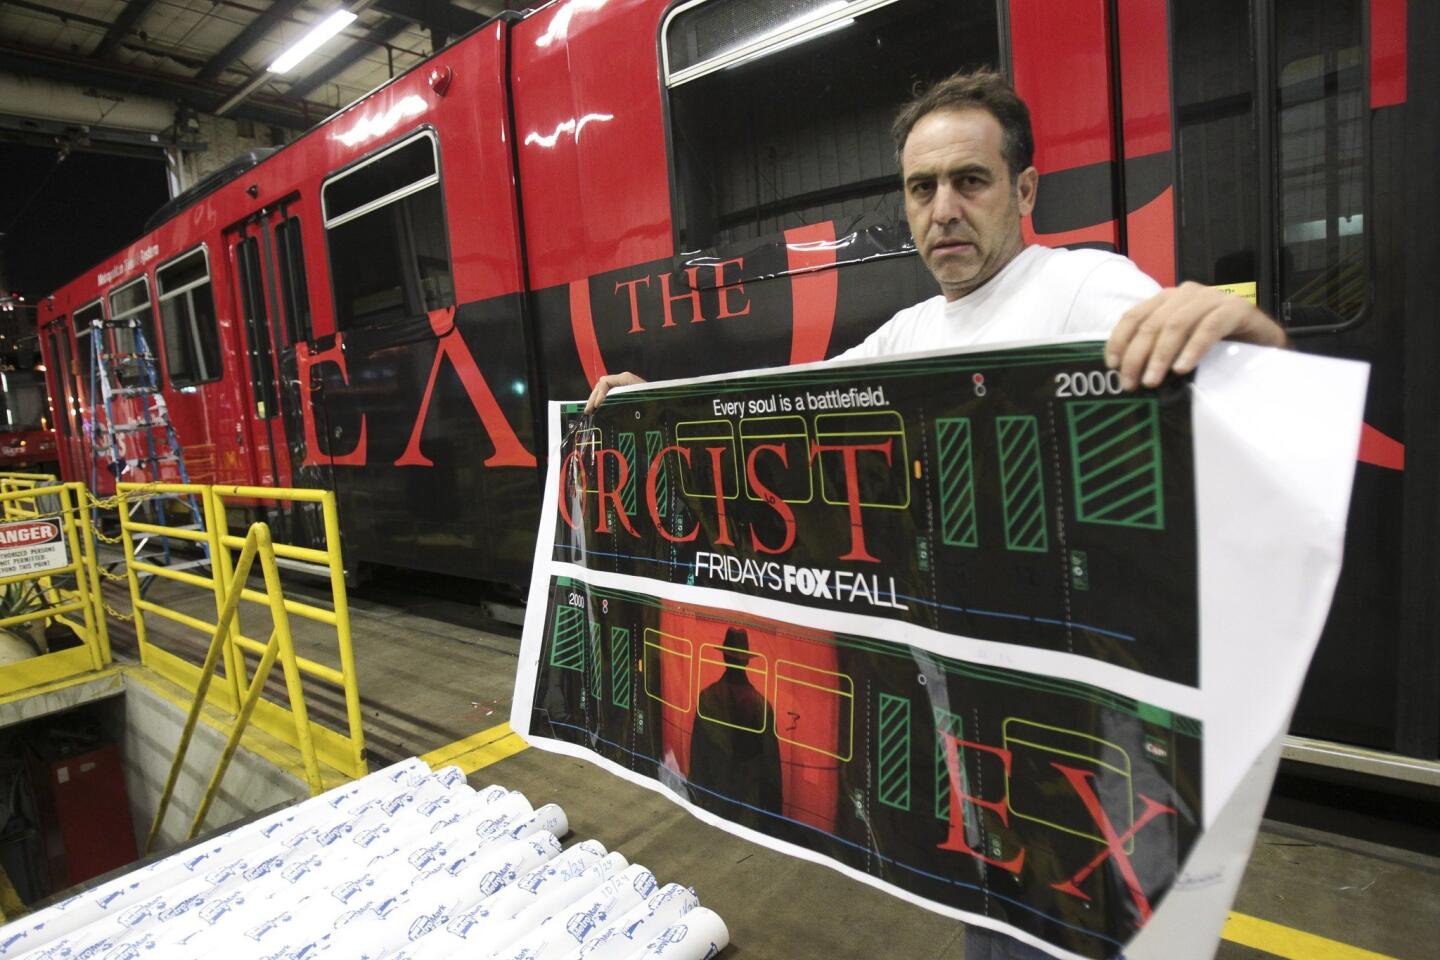 Farzad Parvizi shows a scaled down printout of what he and his nephew, who are with Pixel imaging Media, will wrap the trolley car behind him with.